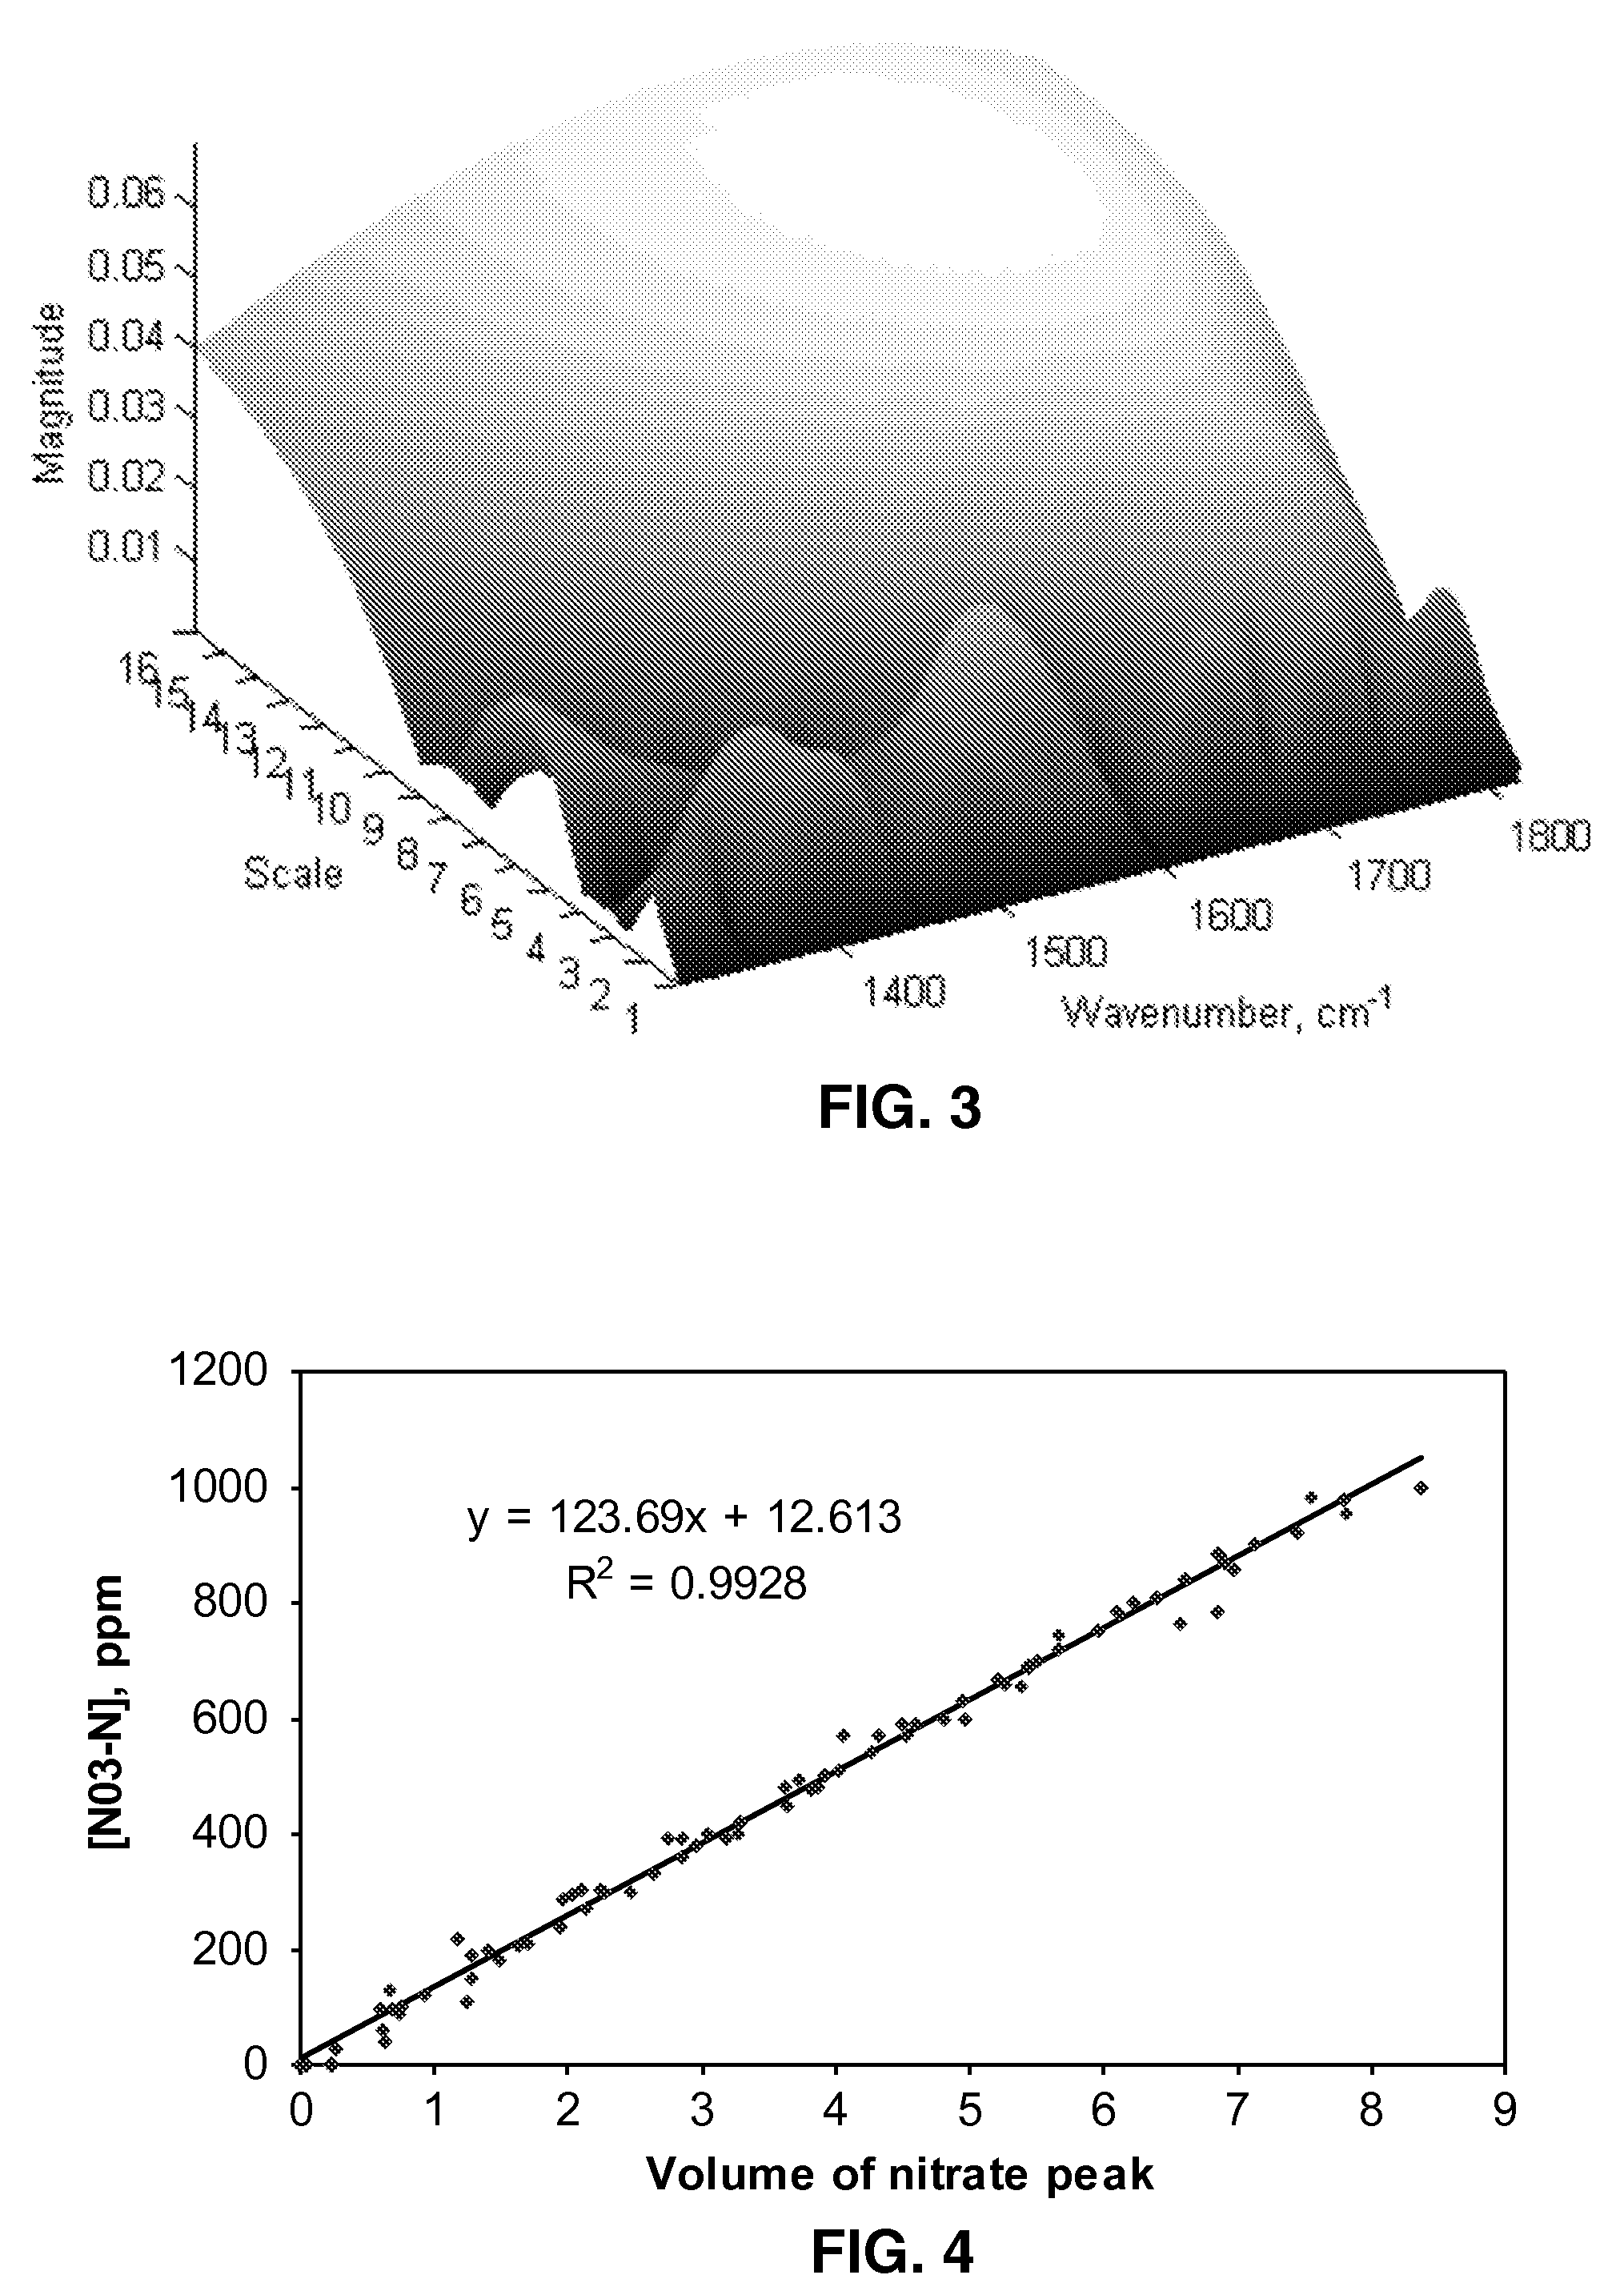 Method for soil content prediction based on a limited number of mid-infrared absorbances